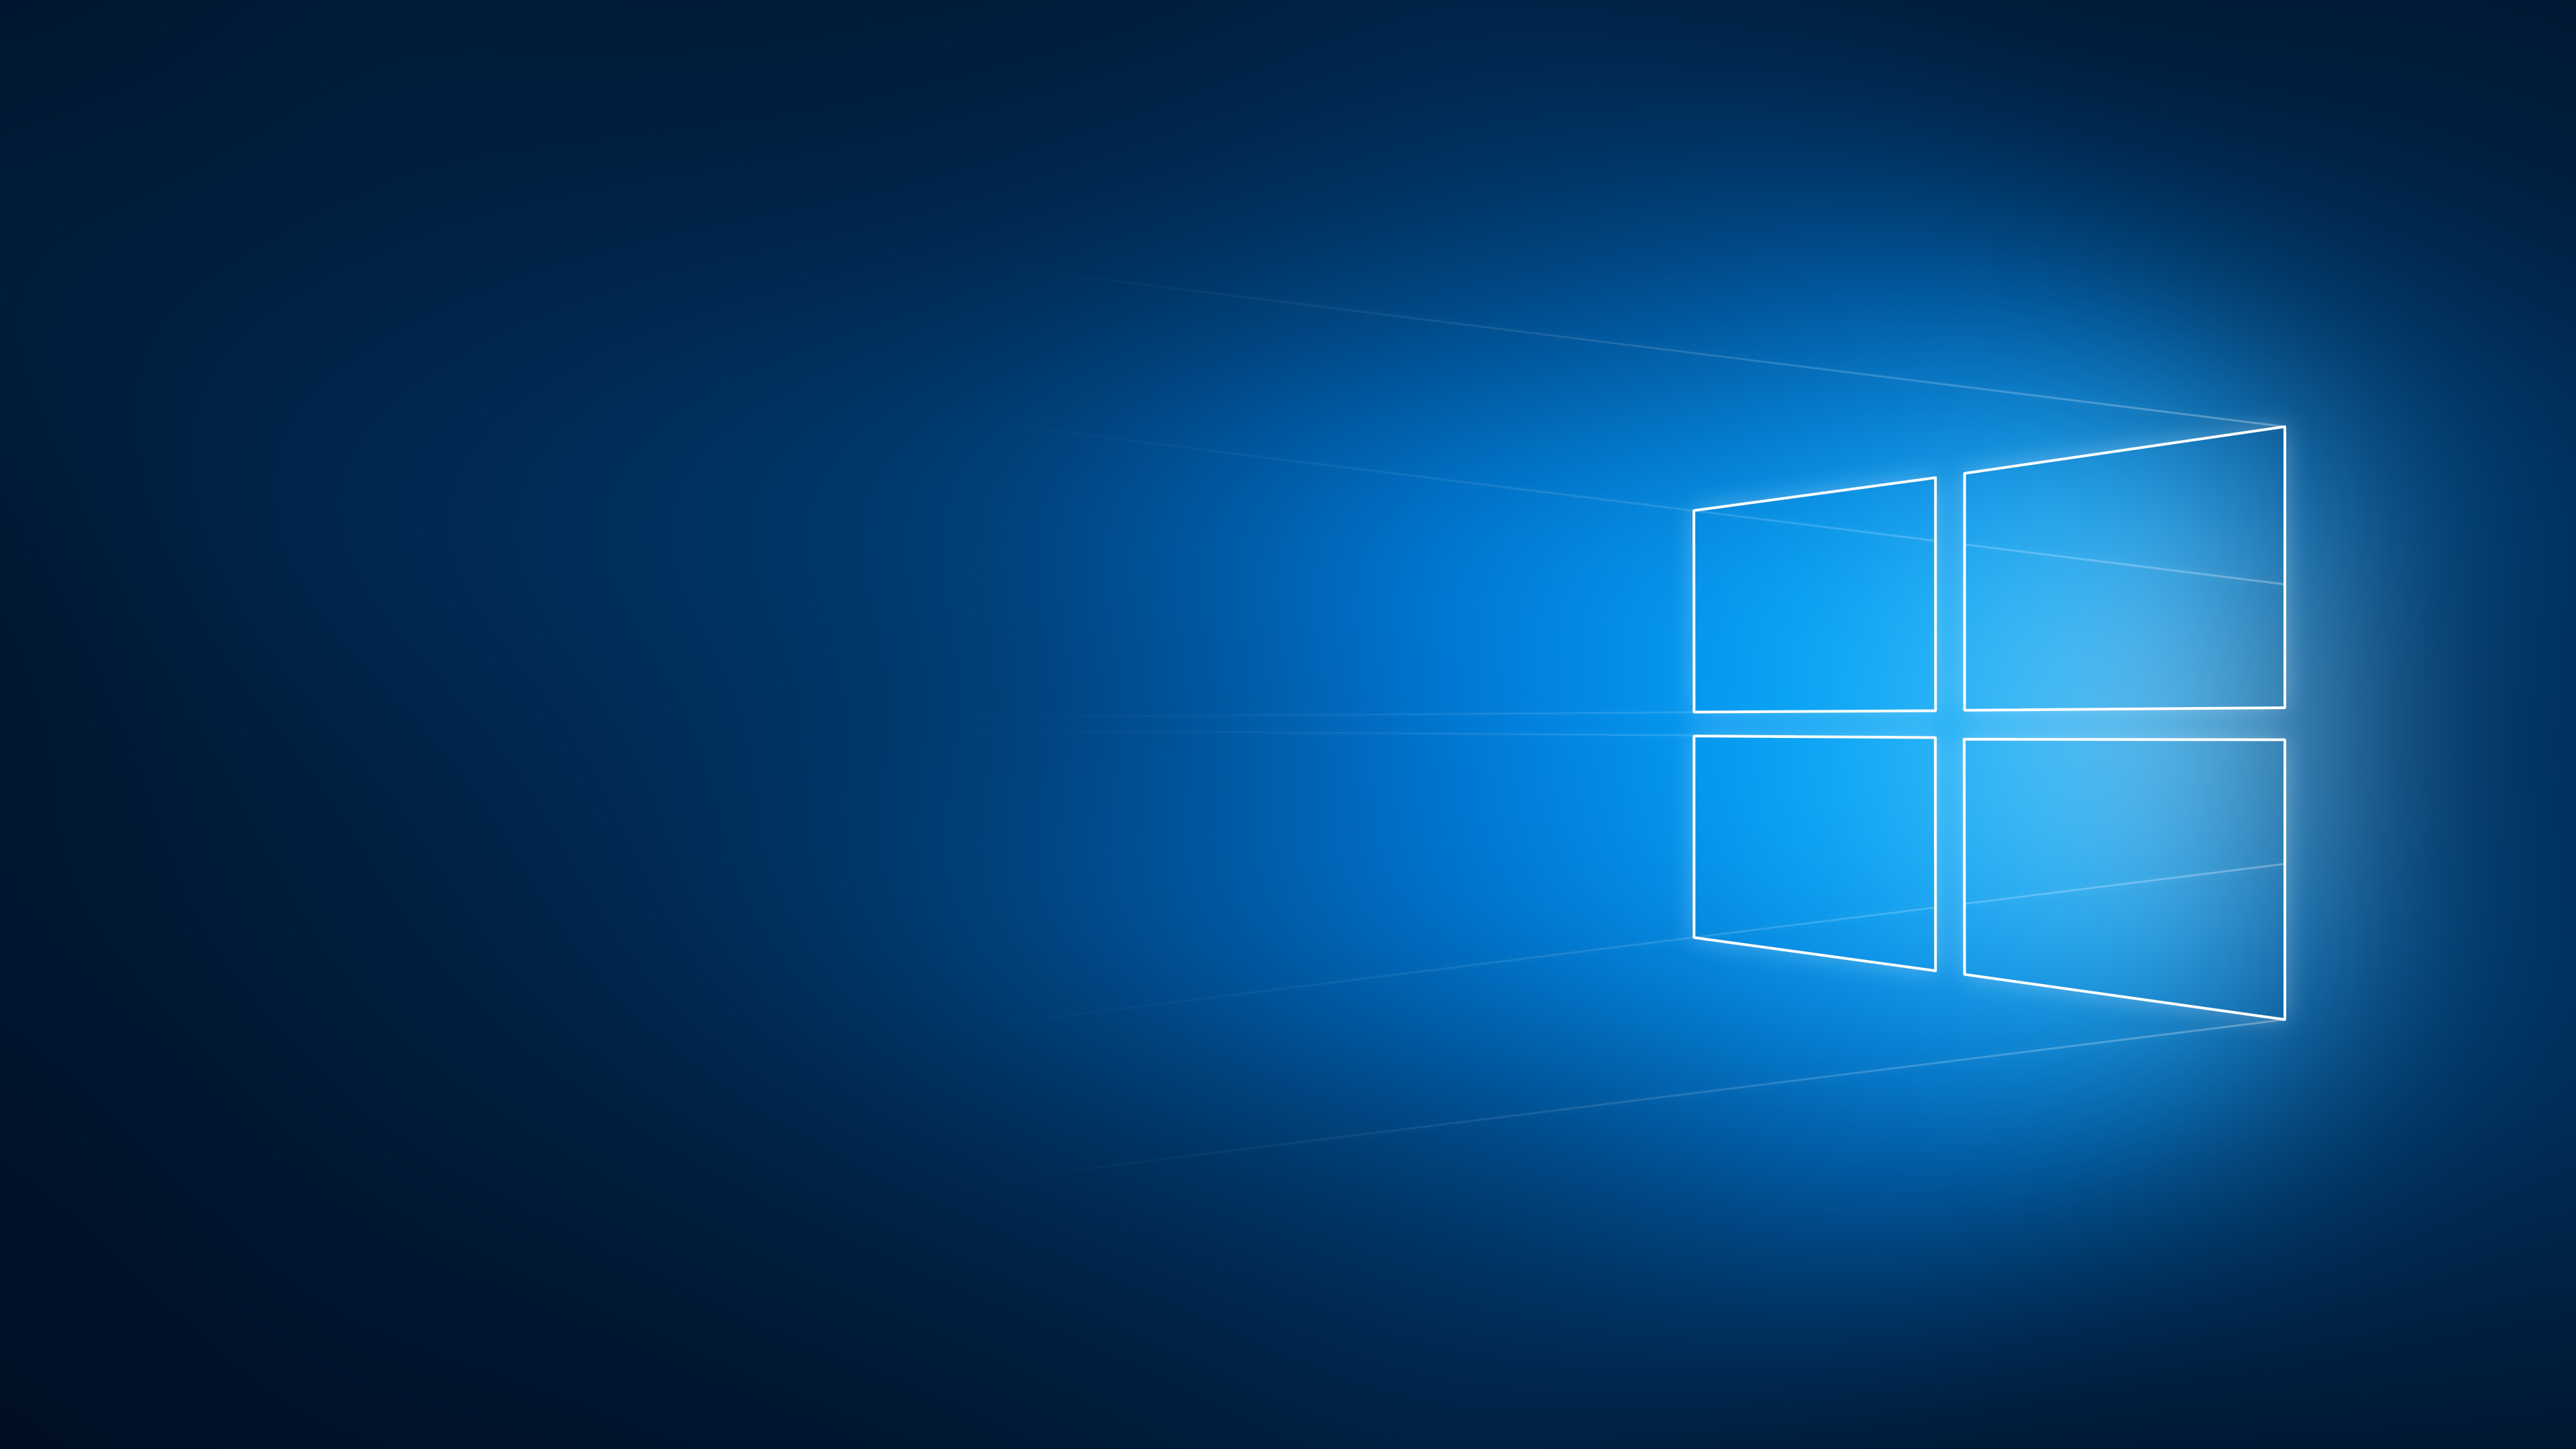 1024x768 Windows 10 Hero Logo 1024x768 Resolution Wallpaper Hd Brands 4k Wallpapers Images Photos And Background